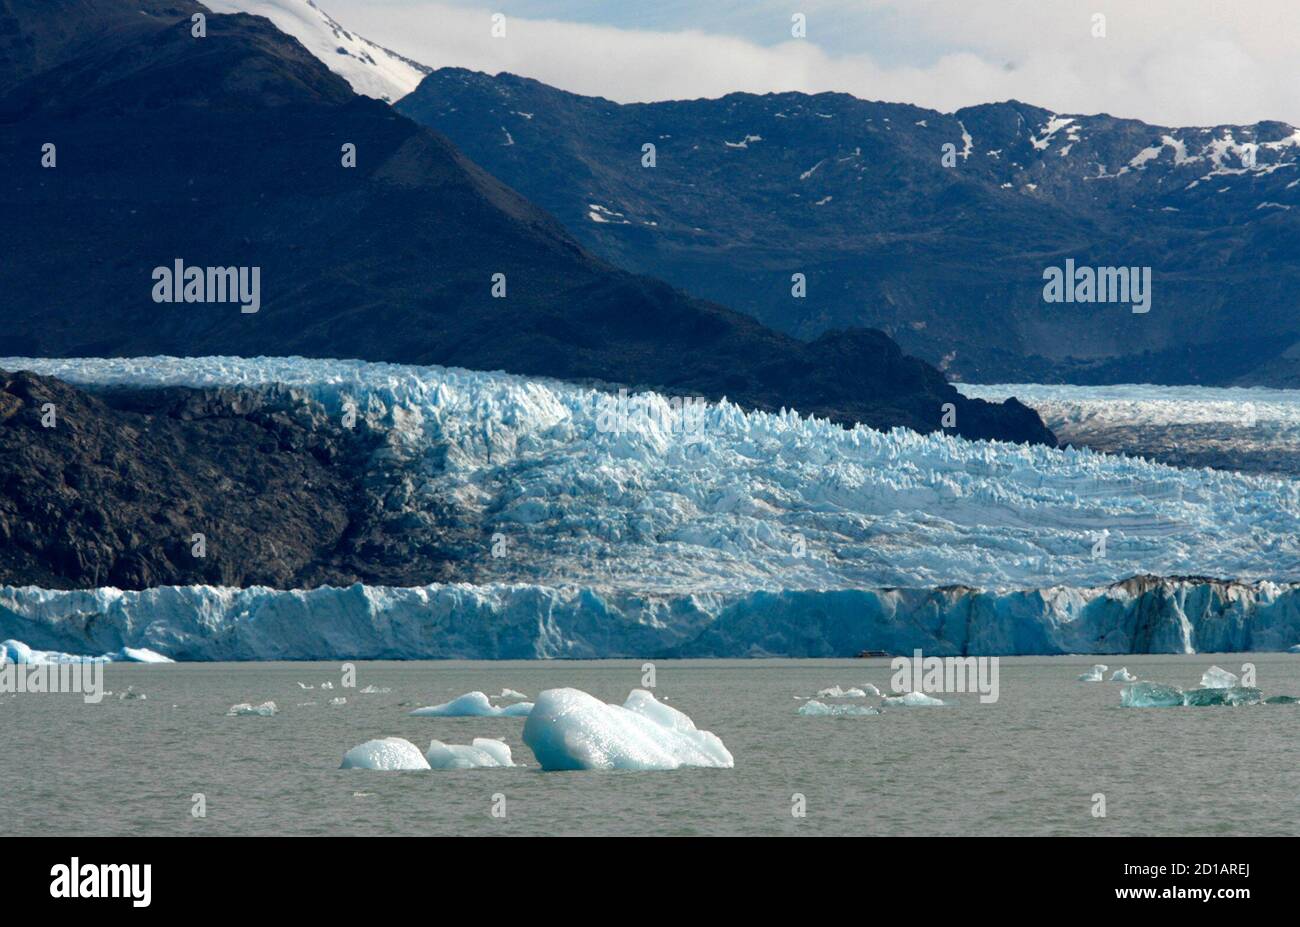 Blocks of ice broken off from the Upsala glacier in the back float on the  waters of Lago Argentino in the Parque Nacional Los Glaciares, southwest of  Argentina in the Patagonian province